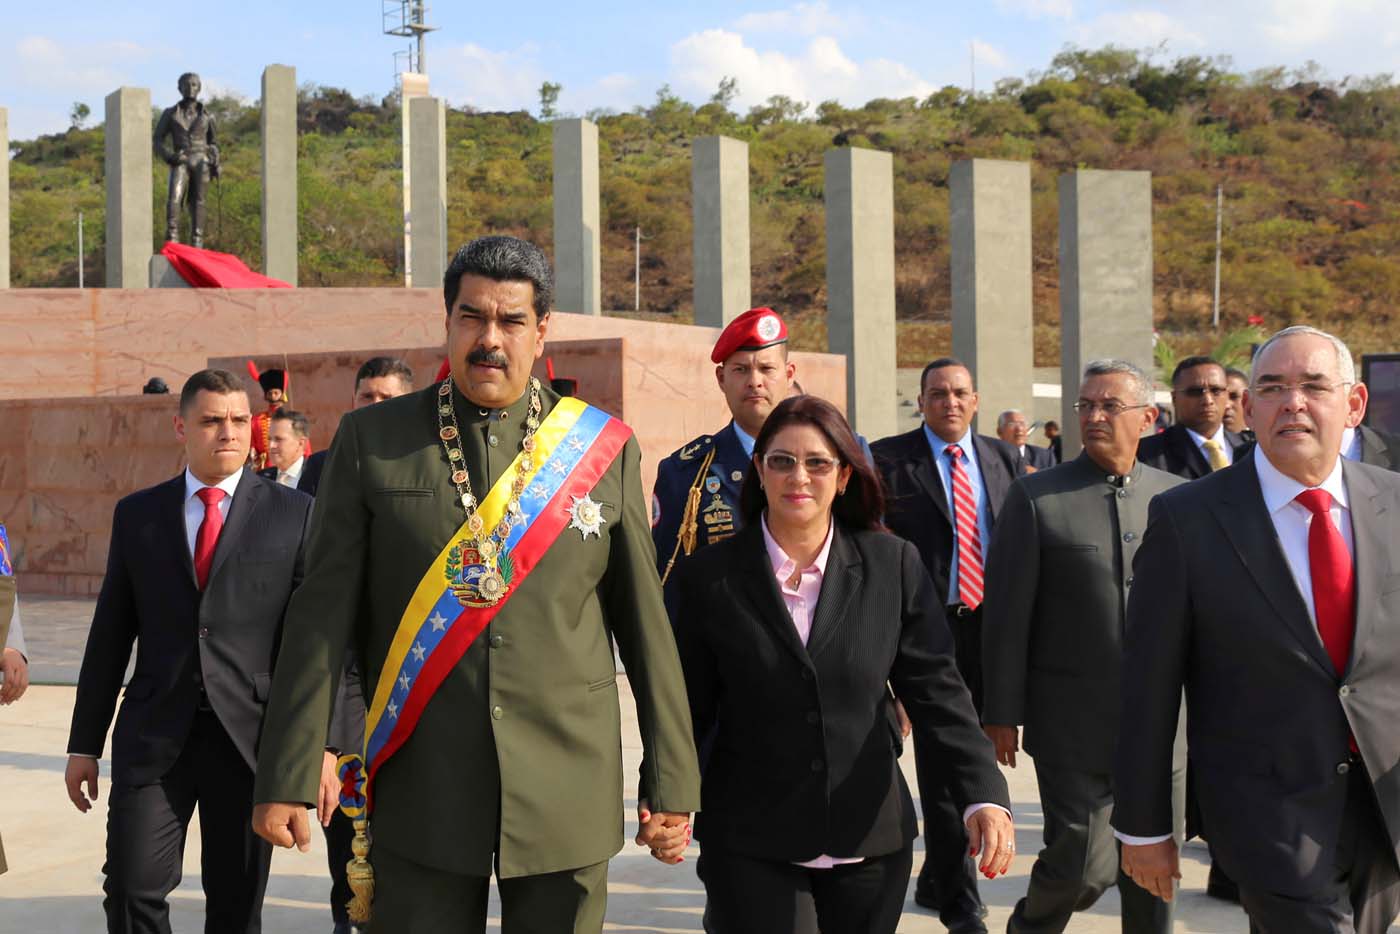 Venezuela's President Nicolas Maduro (2nd L) arrives to an event to conmemorate the bicentennial of the Battle of San Felix, next to his wife Cilia Flores (C), in San Felix, Venezuela April 11, 2017. Miraflores Palace/Handout via REUTERS ATTENTION EDITORS - THIS PICTURE WAS PROVIDED BY A THIRD PARTY. EDITORIAL USE ONLY.